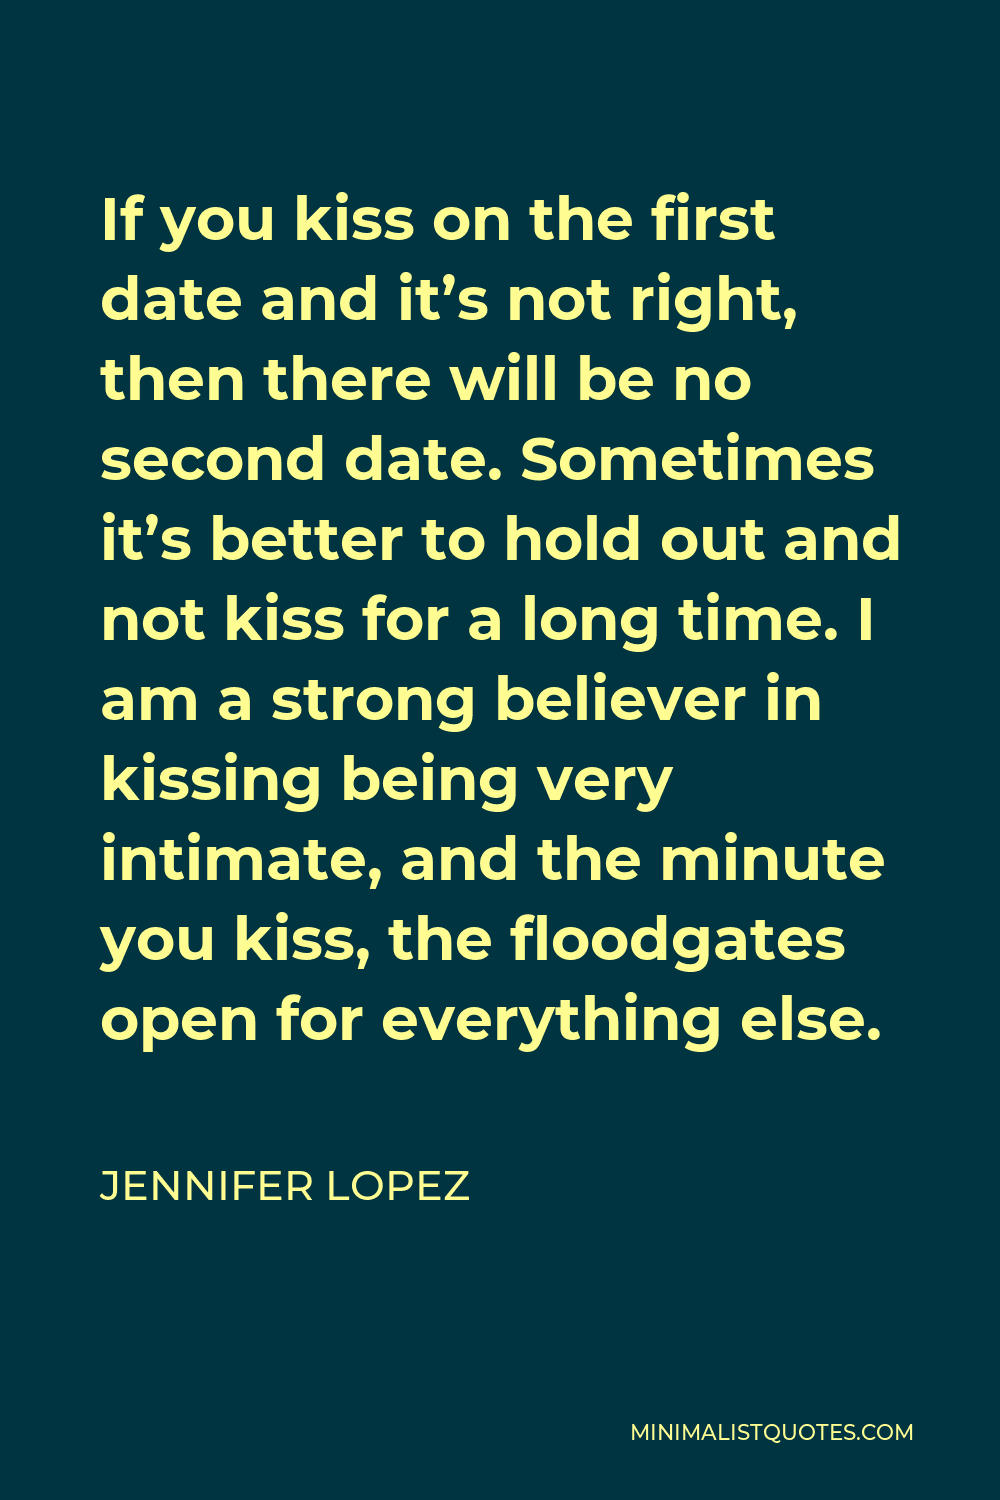 Jennifer Lopez Quote - If you kiss on the first date and it’s not right, then there will be no second date. Sometimes it’s better to hold out and not kiss for a long time. I am a strong believer in kissing being very intimate, and the minute you kiss, the floodgates open for everything else.